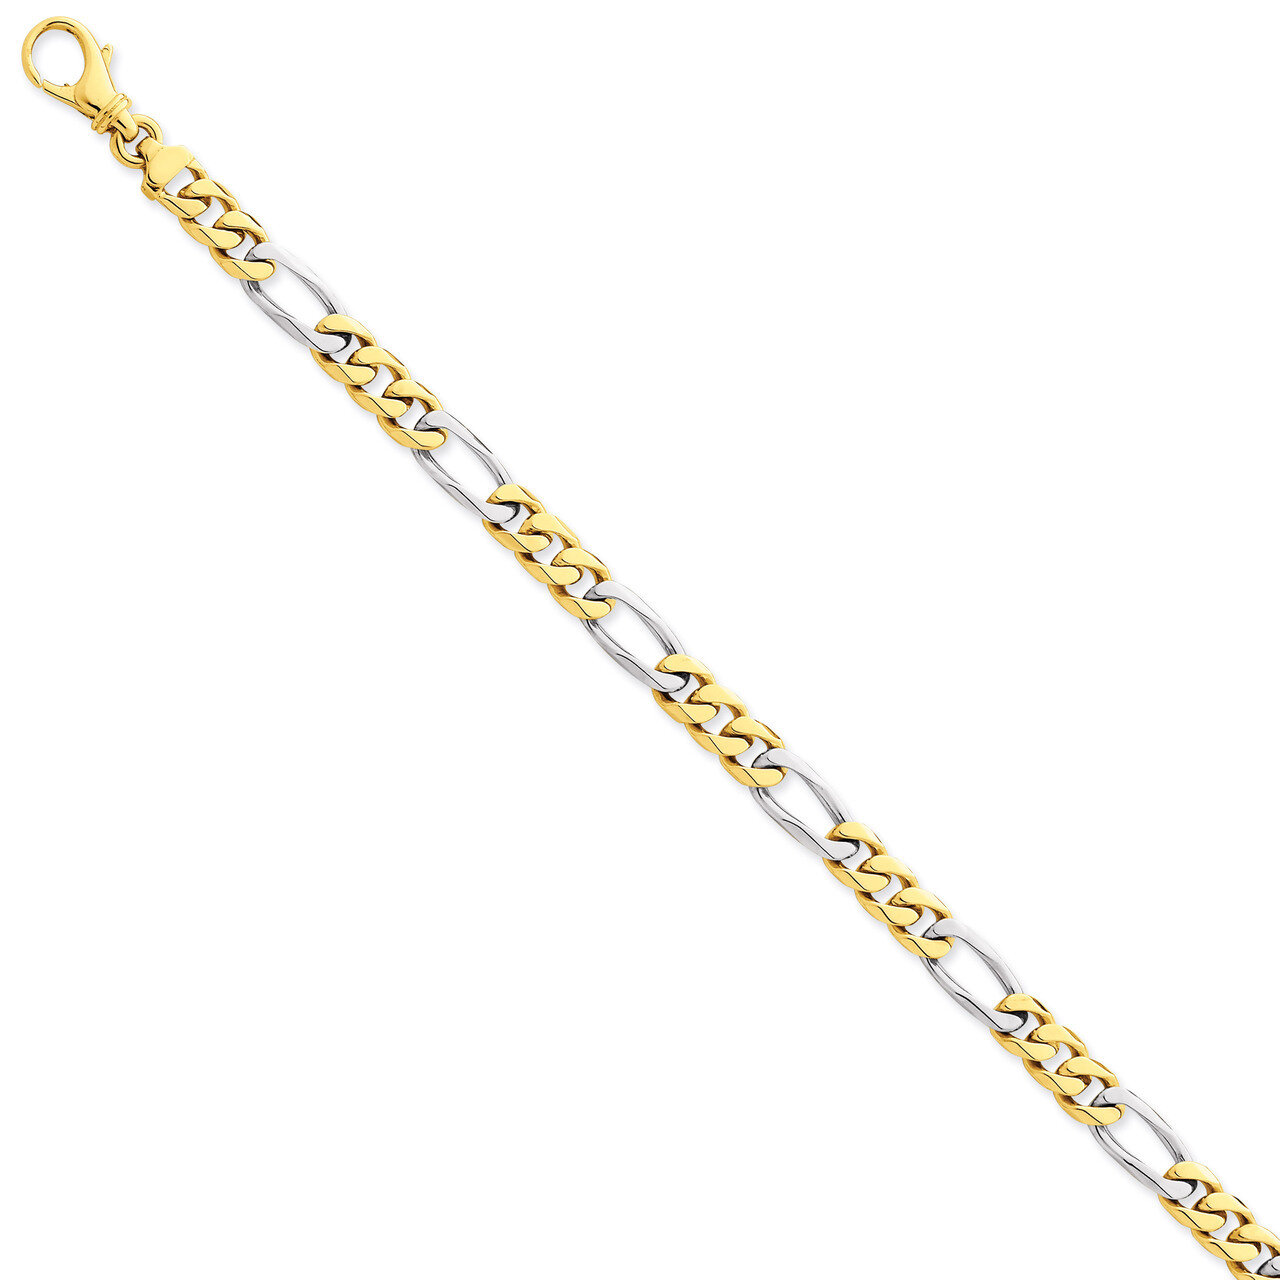 6.2mm Polished Fancy Link Chain 18 Inch 14k Two-Tone Gold LK488-18